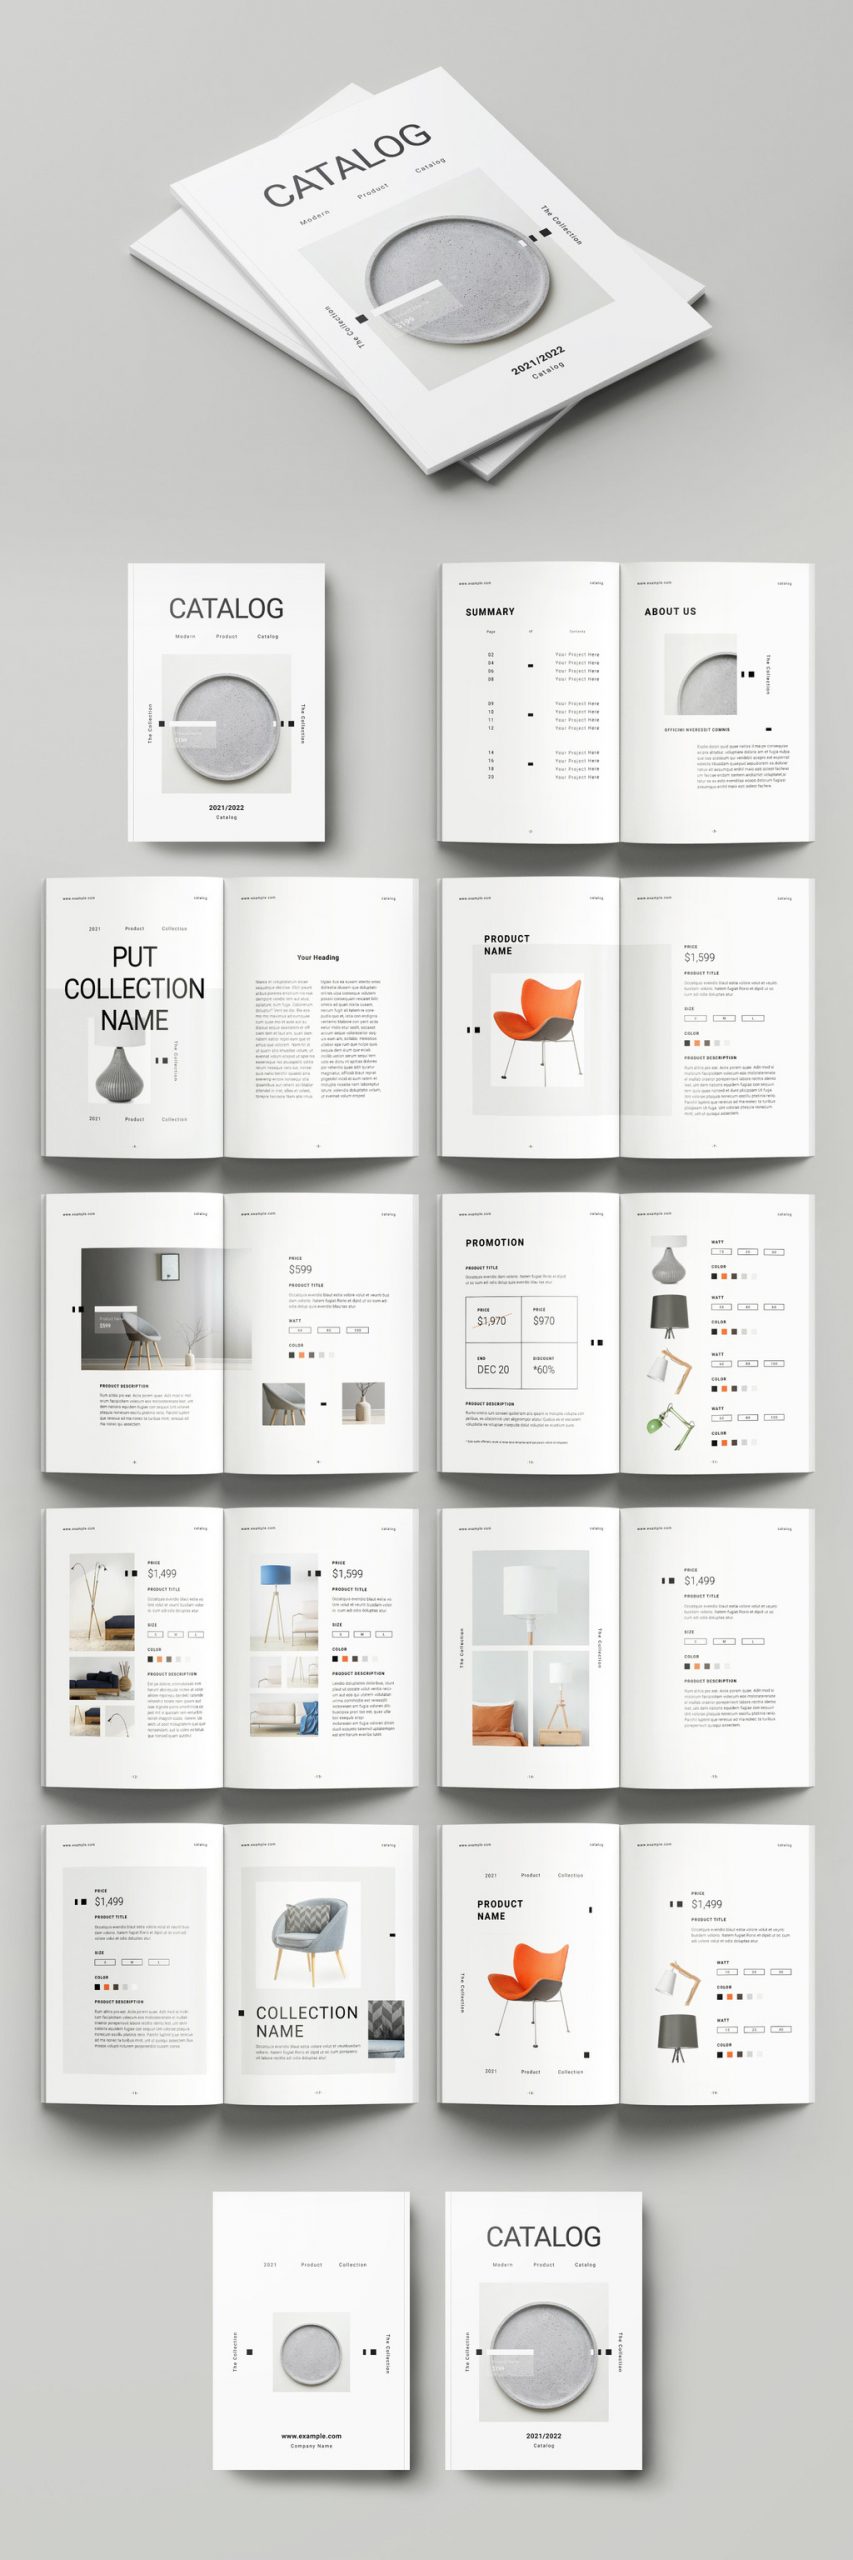 Clean Product Catalog Template for Adobe InDesign